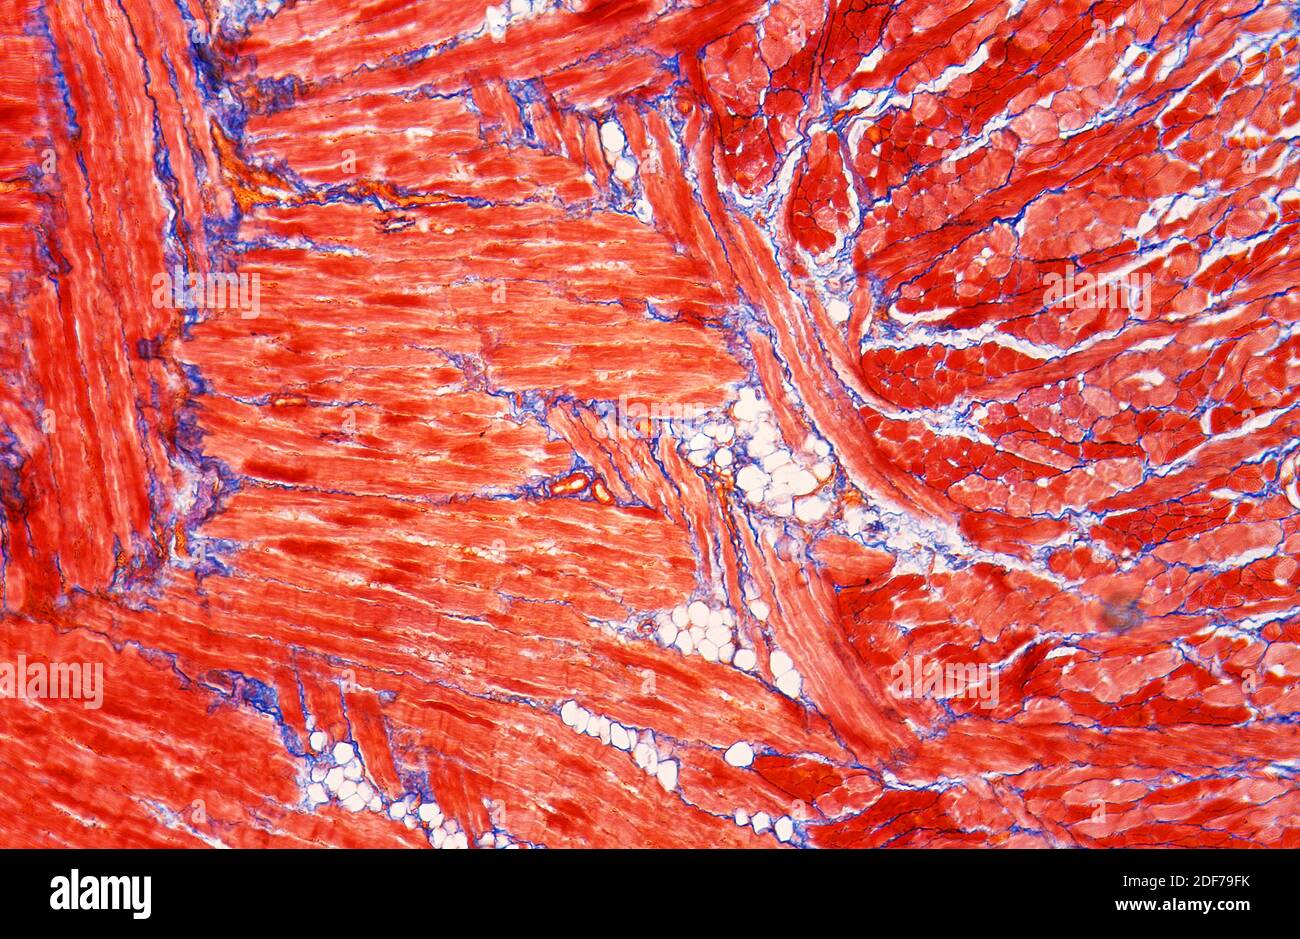 Skeletal muscle with cross and longitudinal sections on tongue. Photomicrograph. Stock Photo